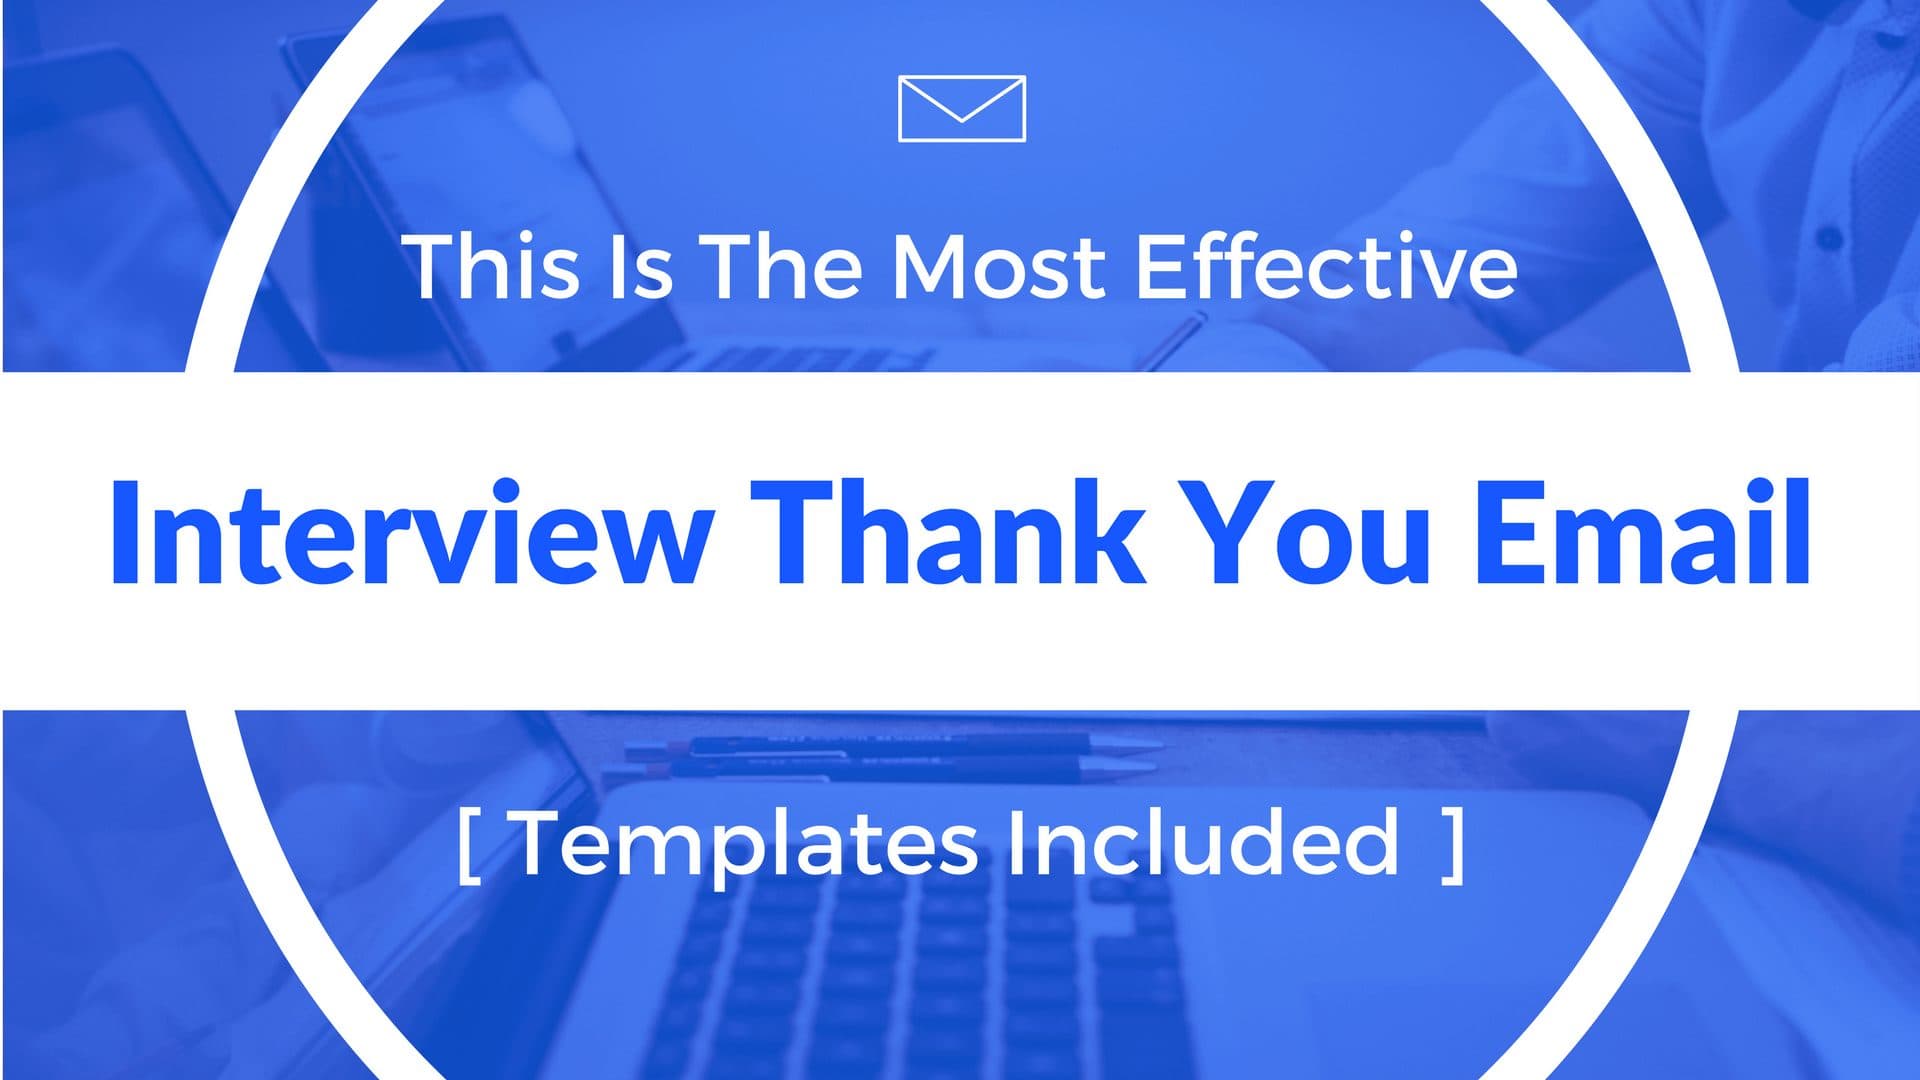 Thank You Letter After Interview Template from cultivatedculture.com